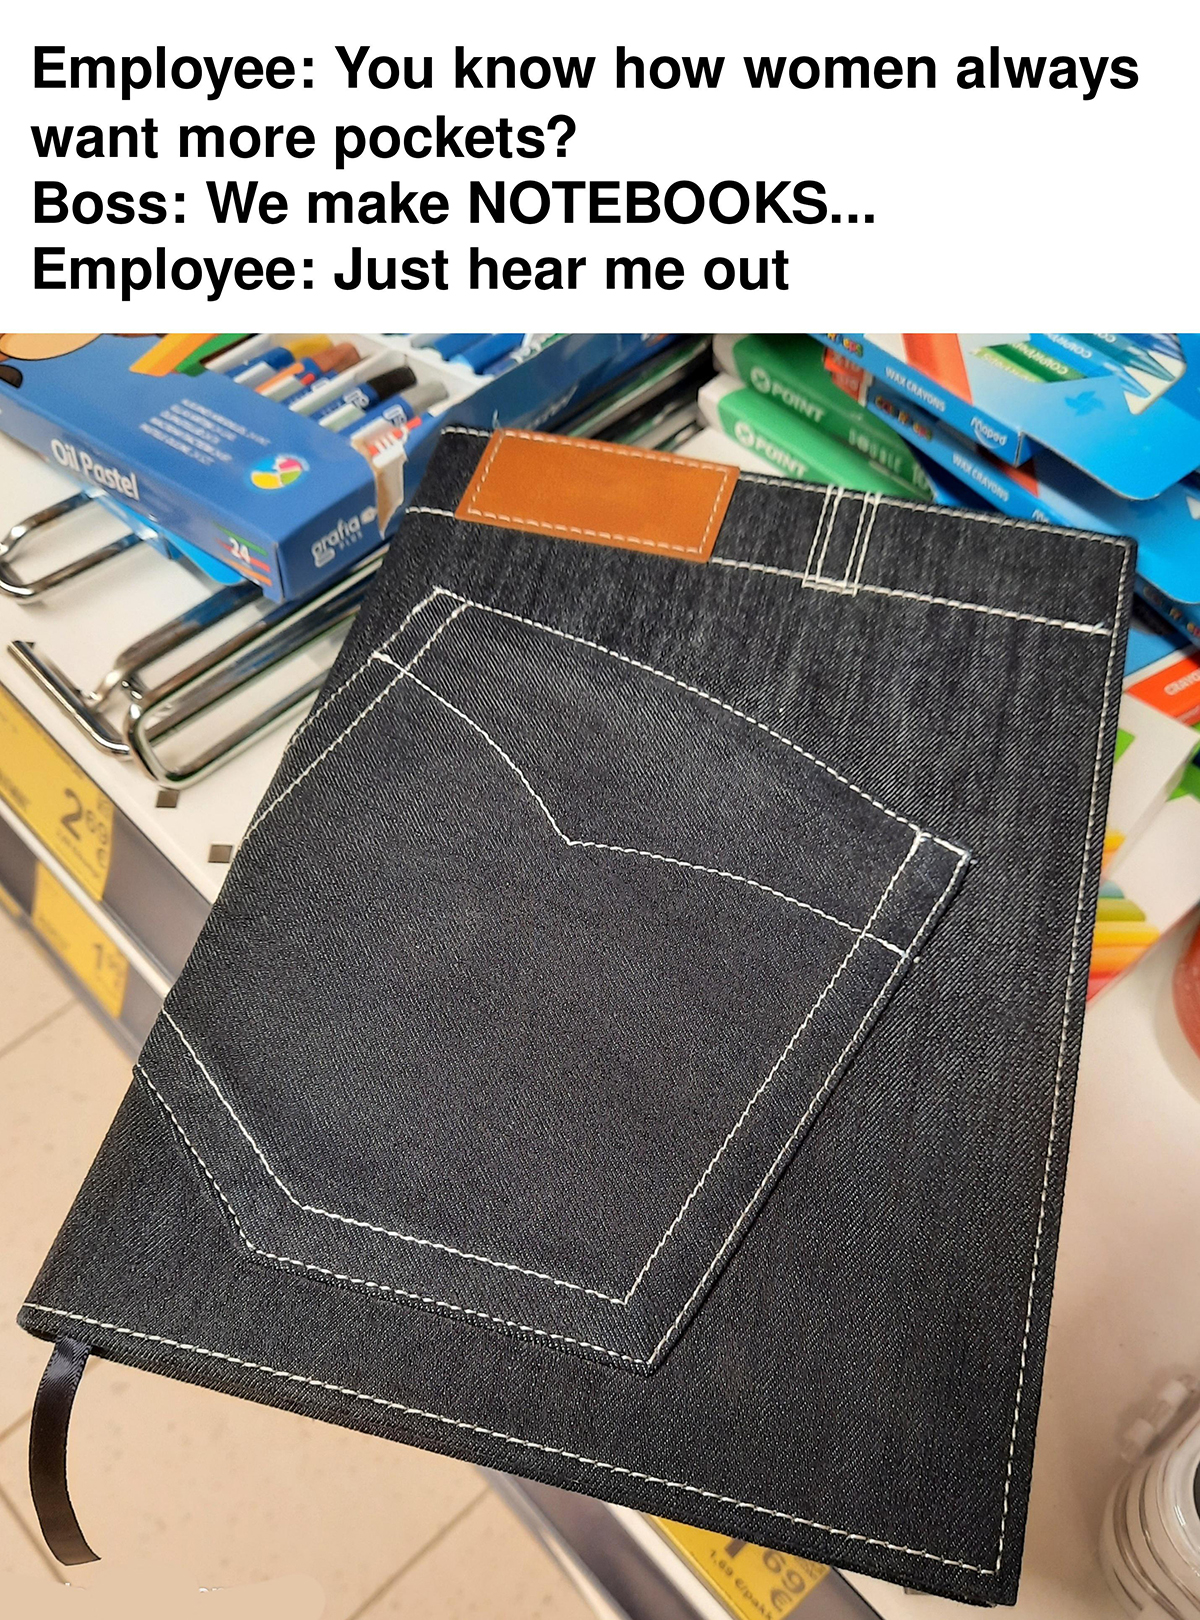 dank memes - material - Employee You know how women always want more pockets? Boss We make Notebooks... Employee Just hear me out Este